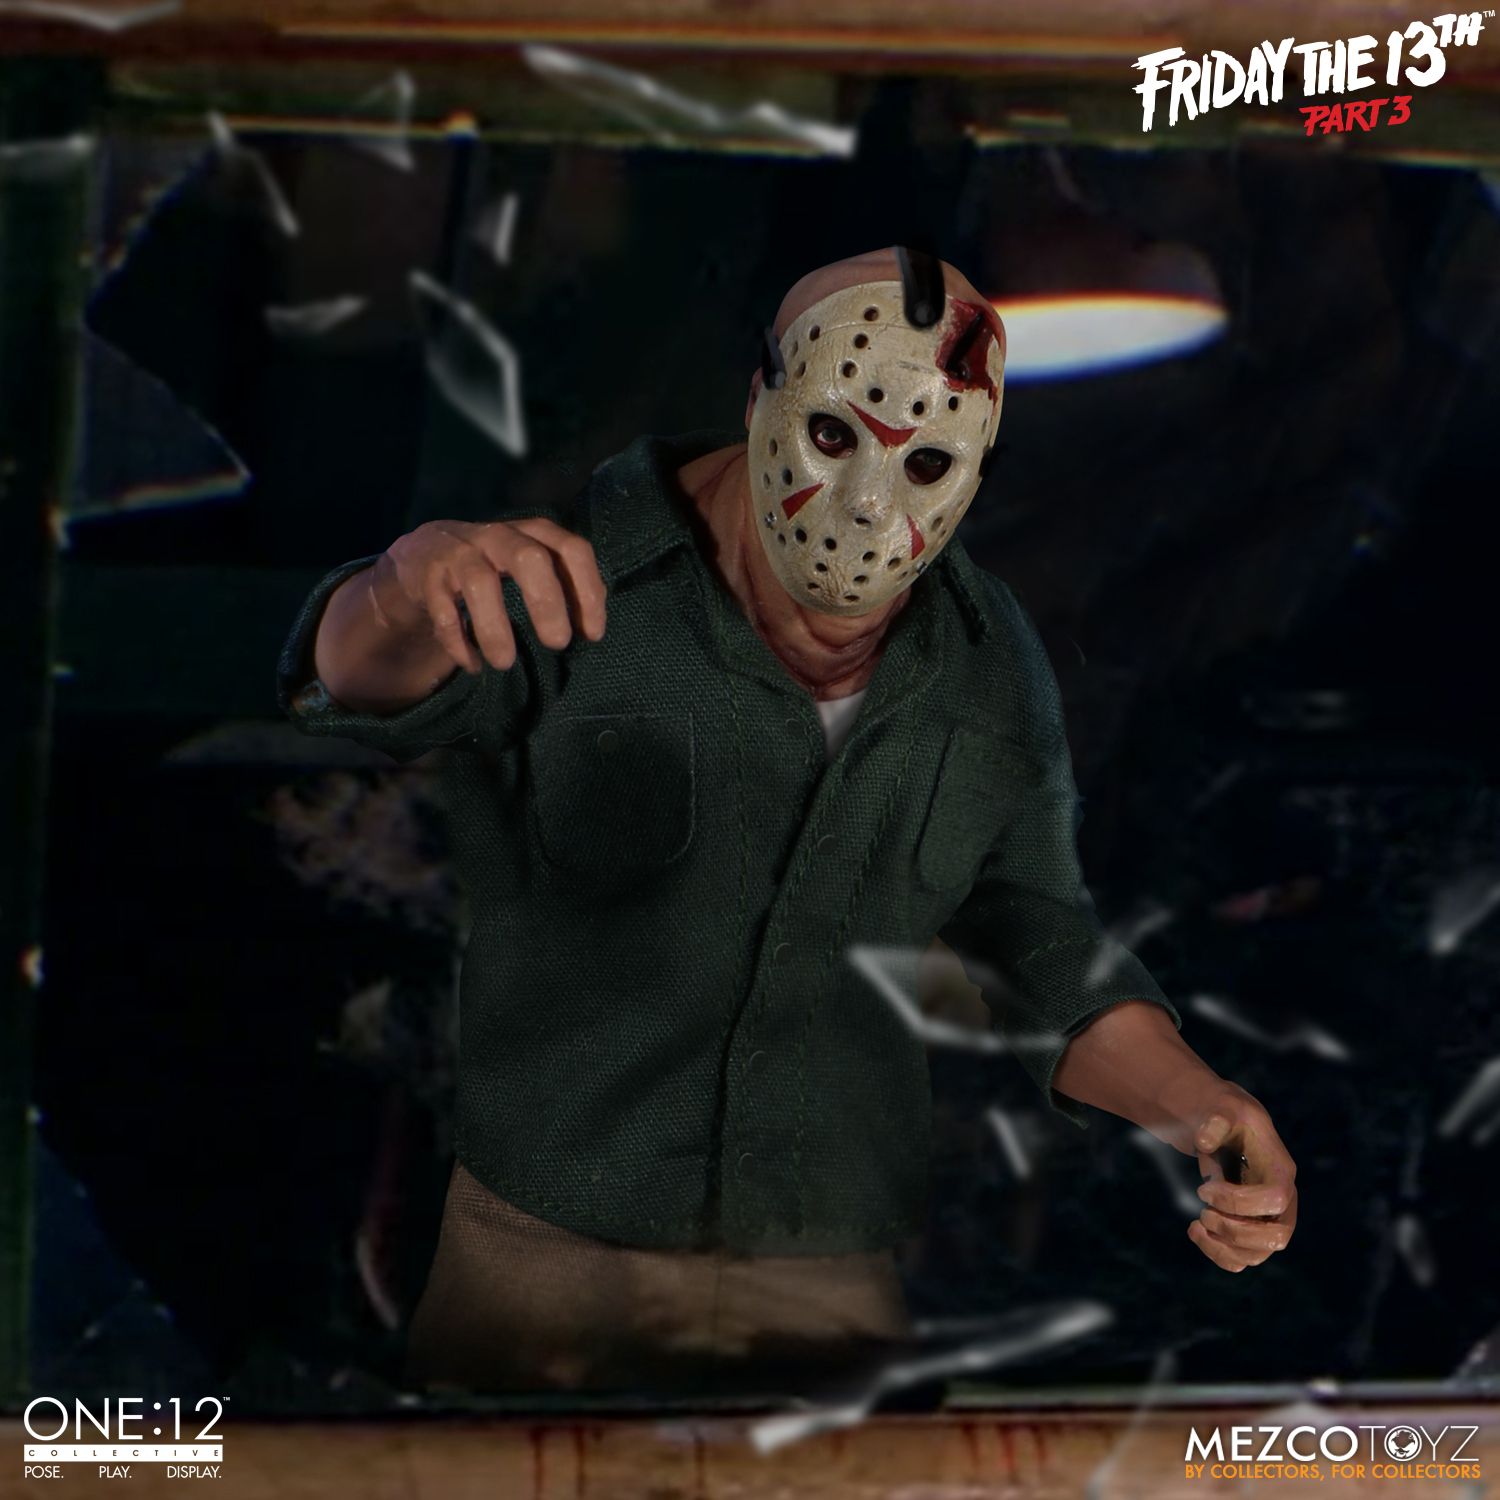 Mezco - One:12 Collective - Friday The 13th Part 3 - Jason Voorhees - Marvelous Toys